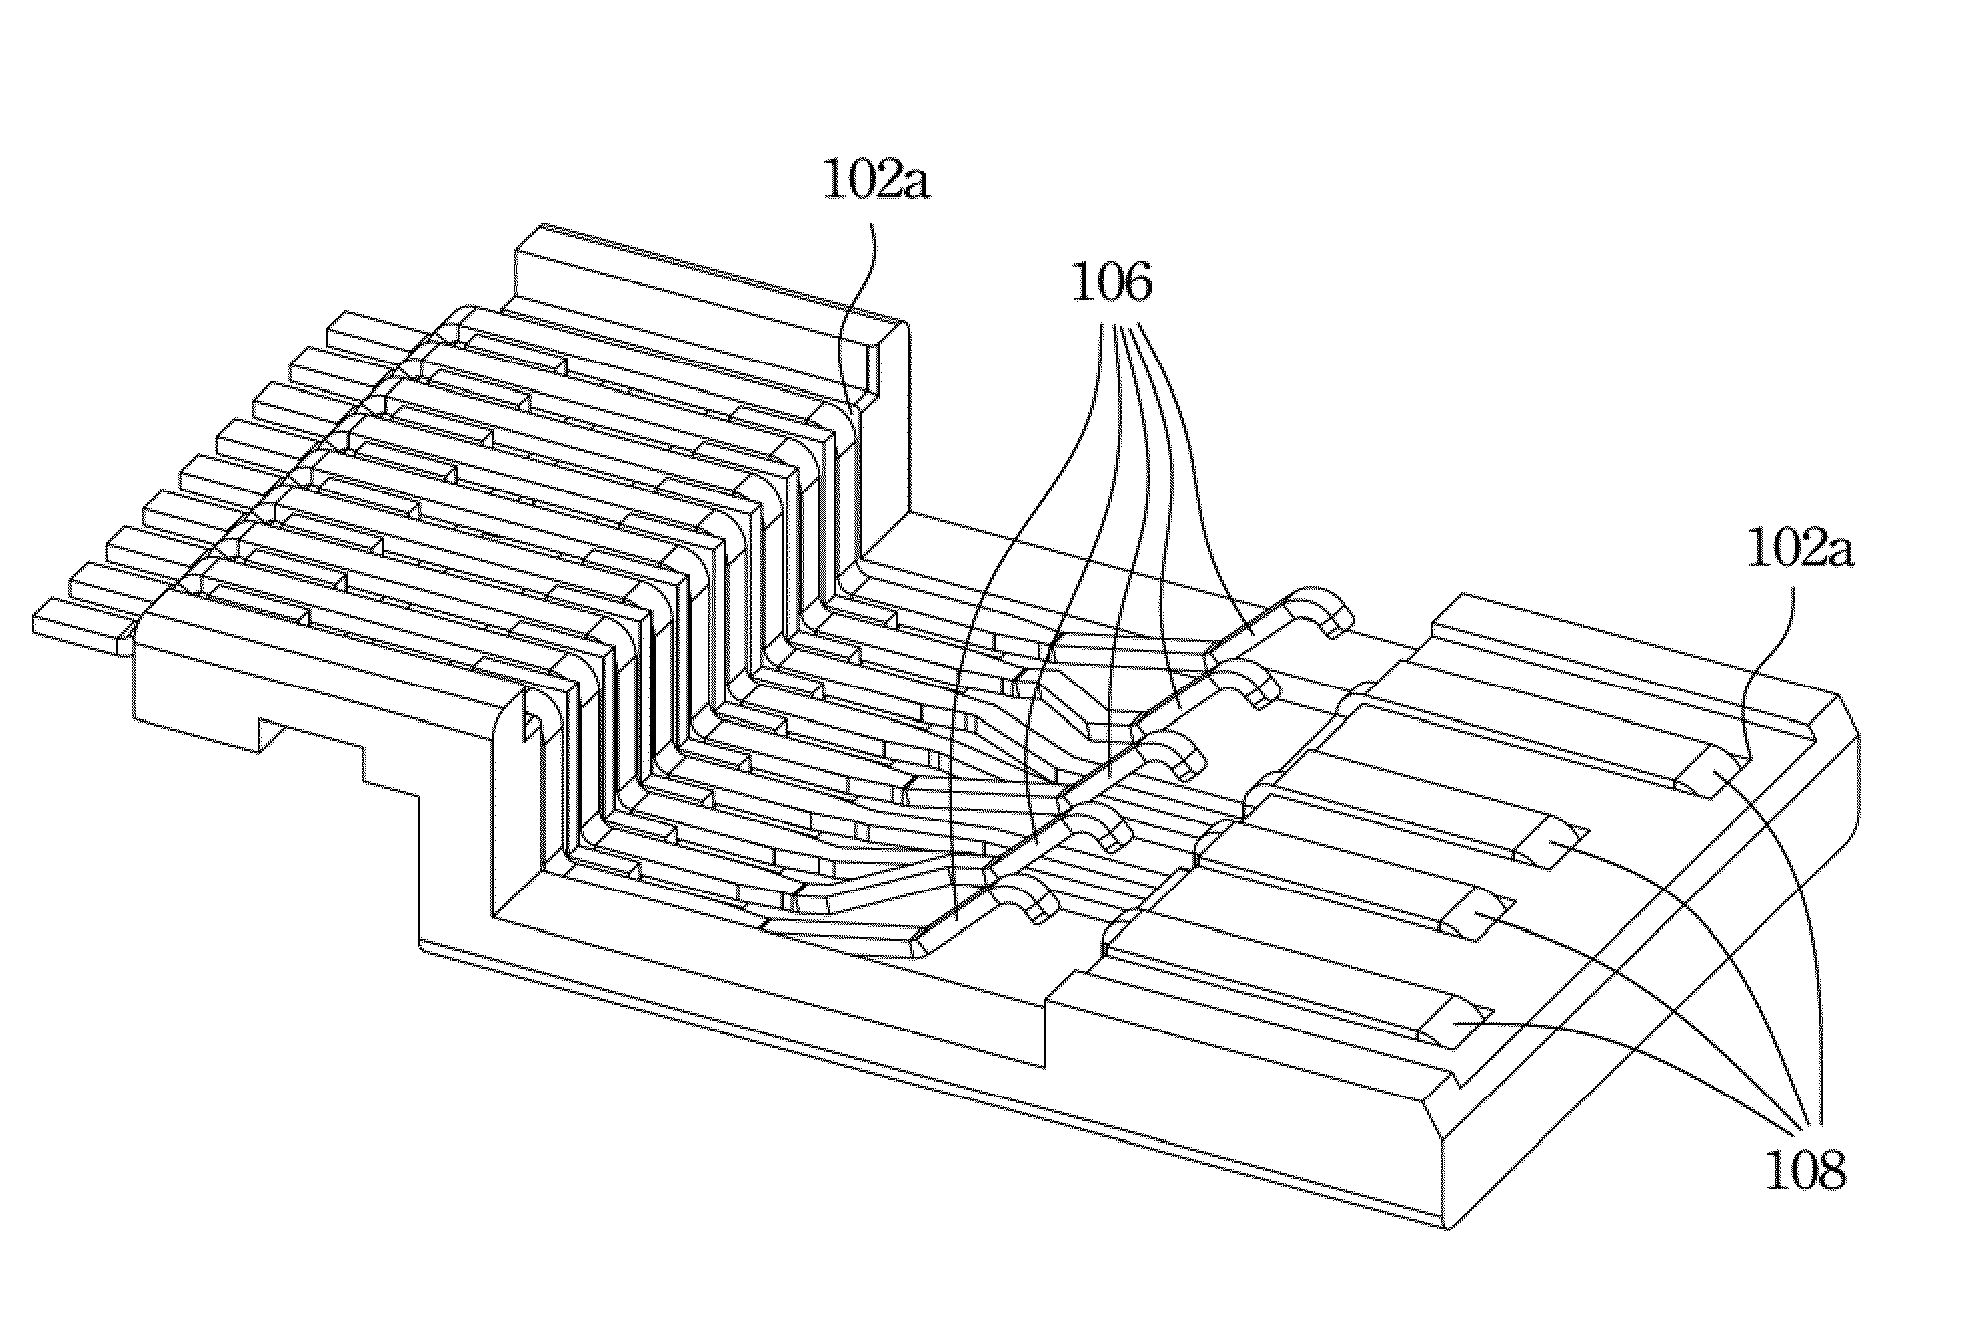 USB connector and contact array thereof